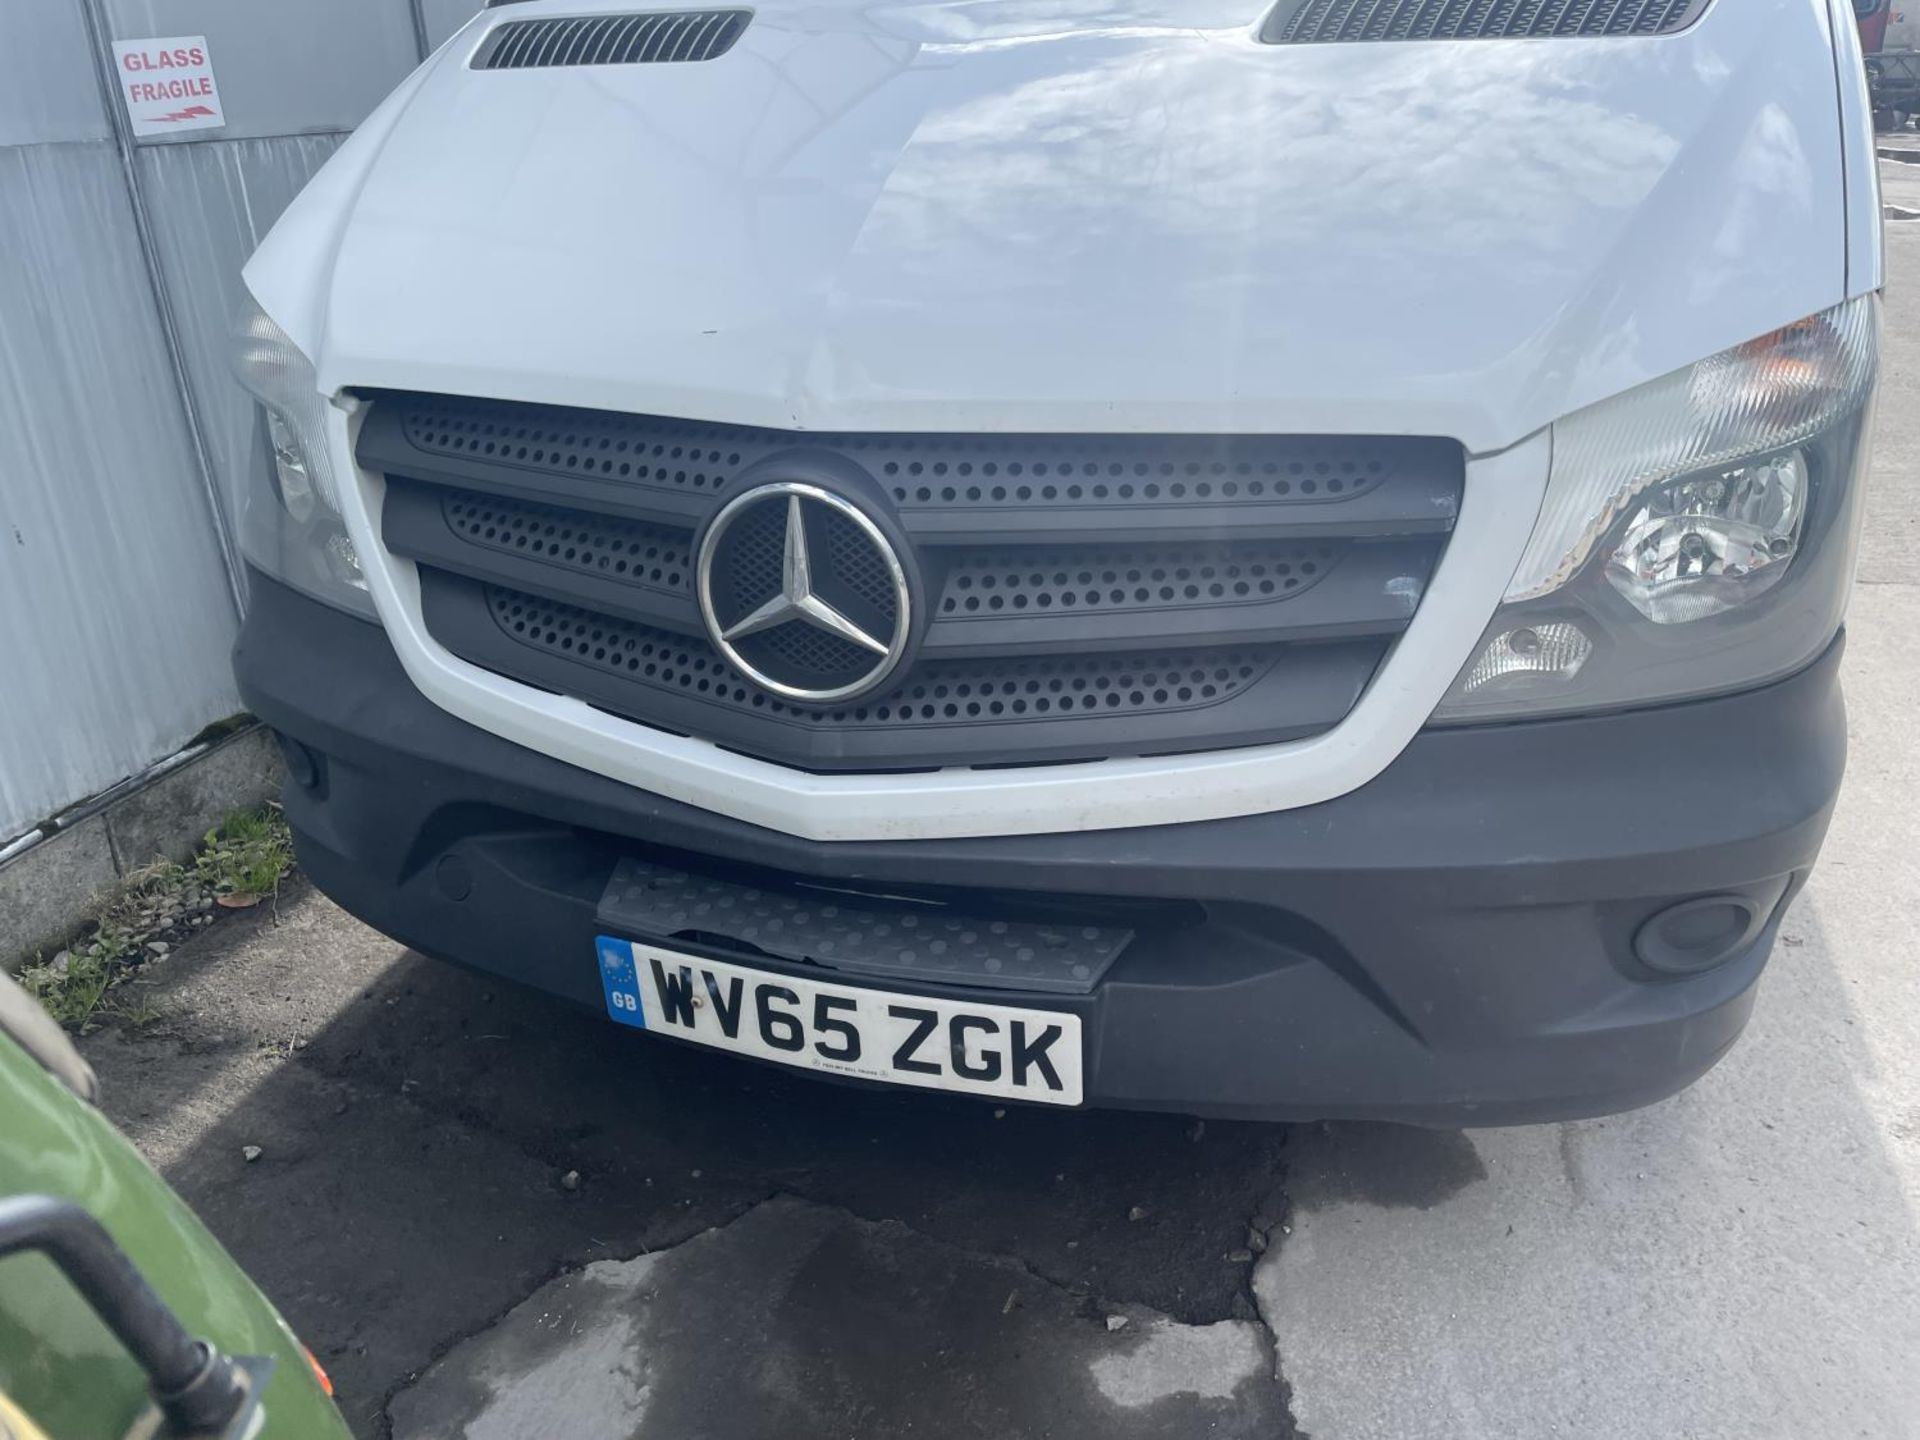 MERCEDES SPRINTER 313 CDI DROP SIDE LORRY WITH TAIL LIFT WV65 ZGK 2 KEYS 163360 MILES FIRST REG 08/ - Image 3 of 14